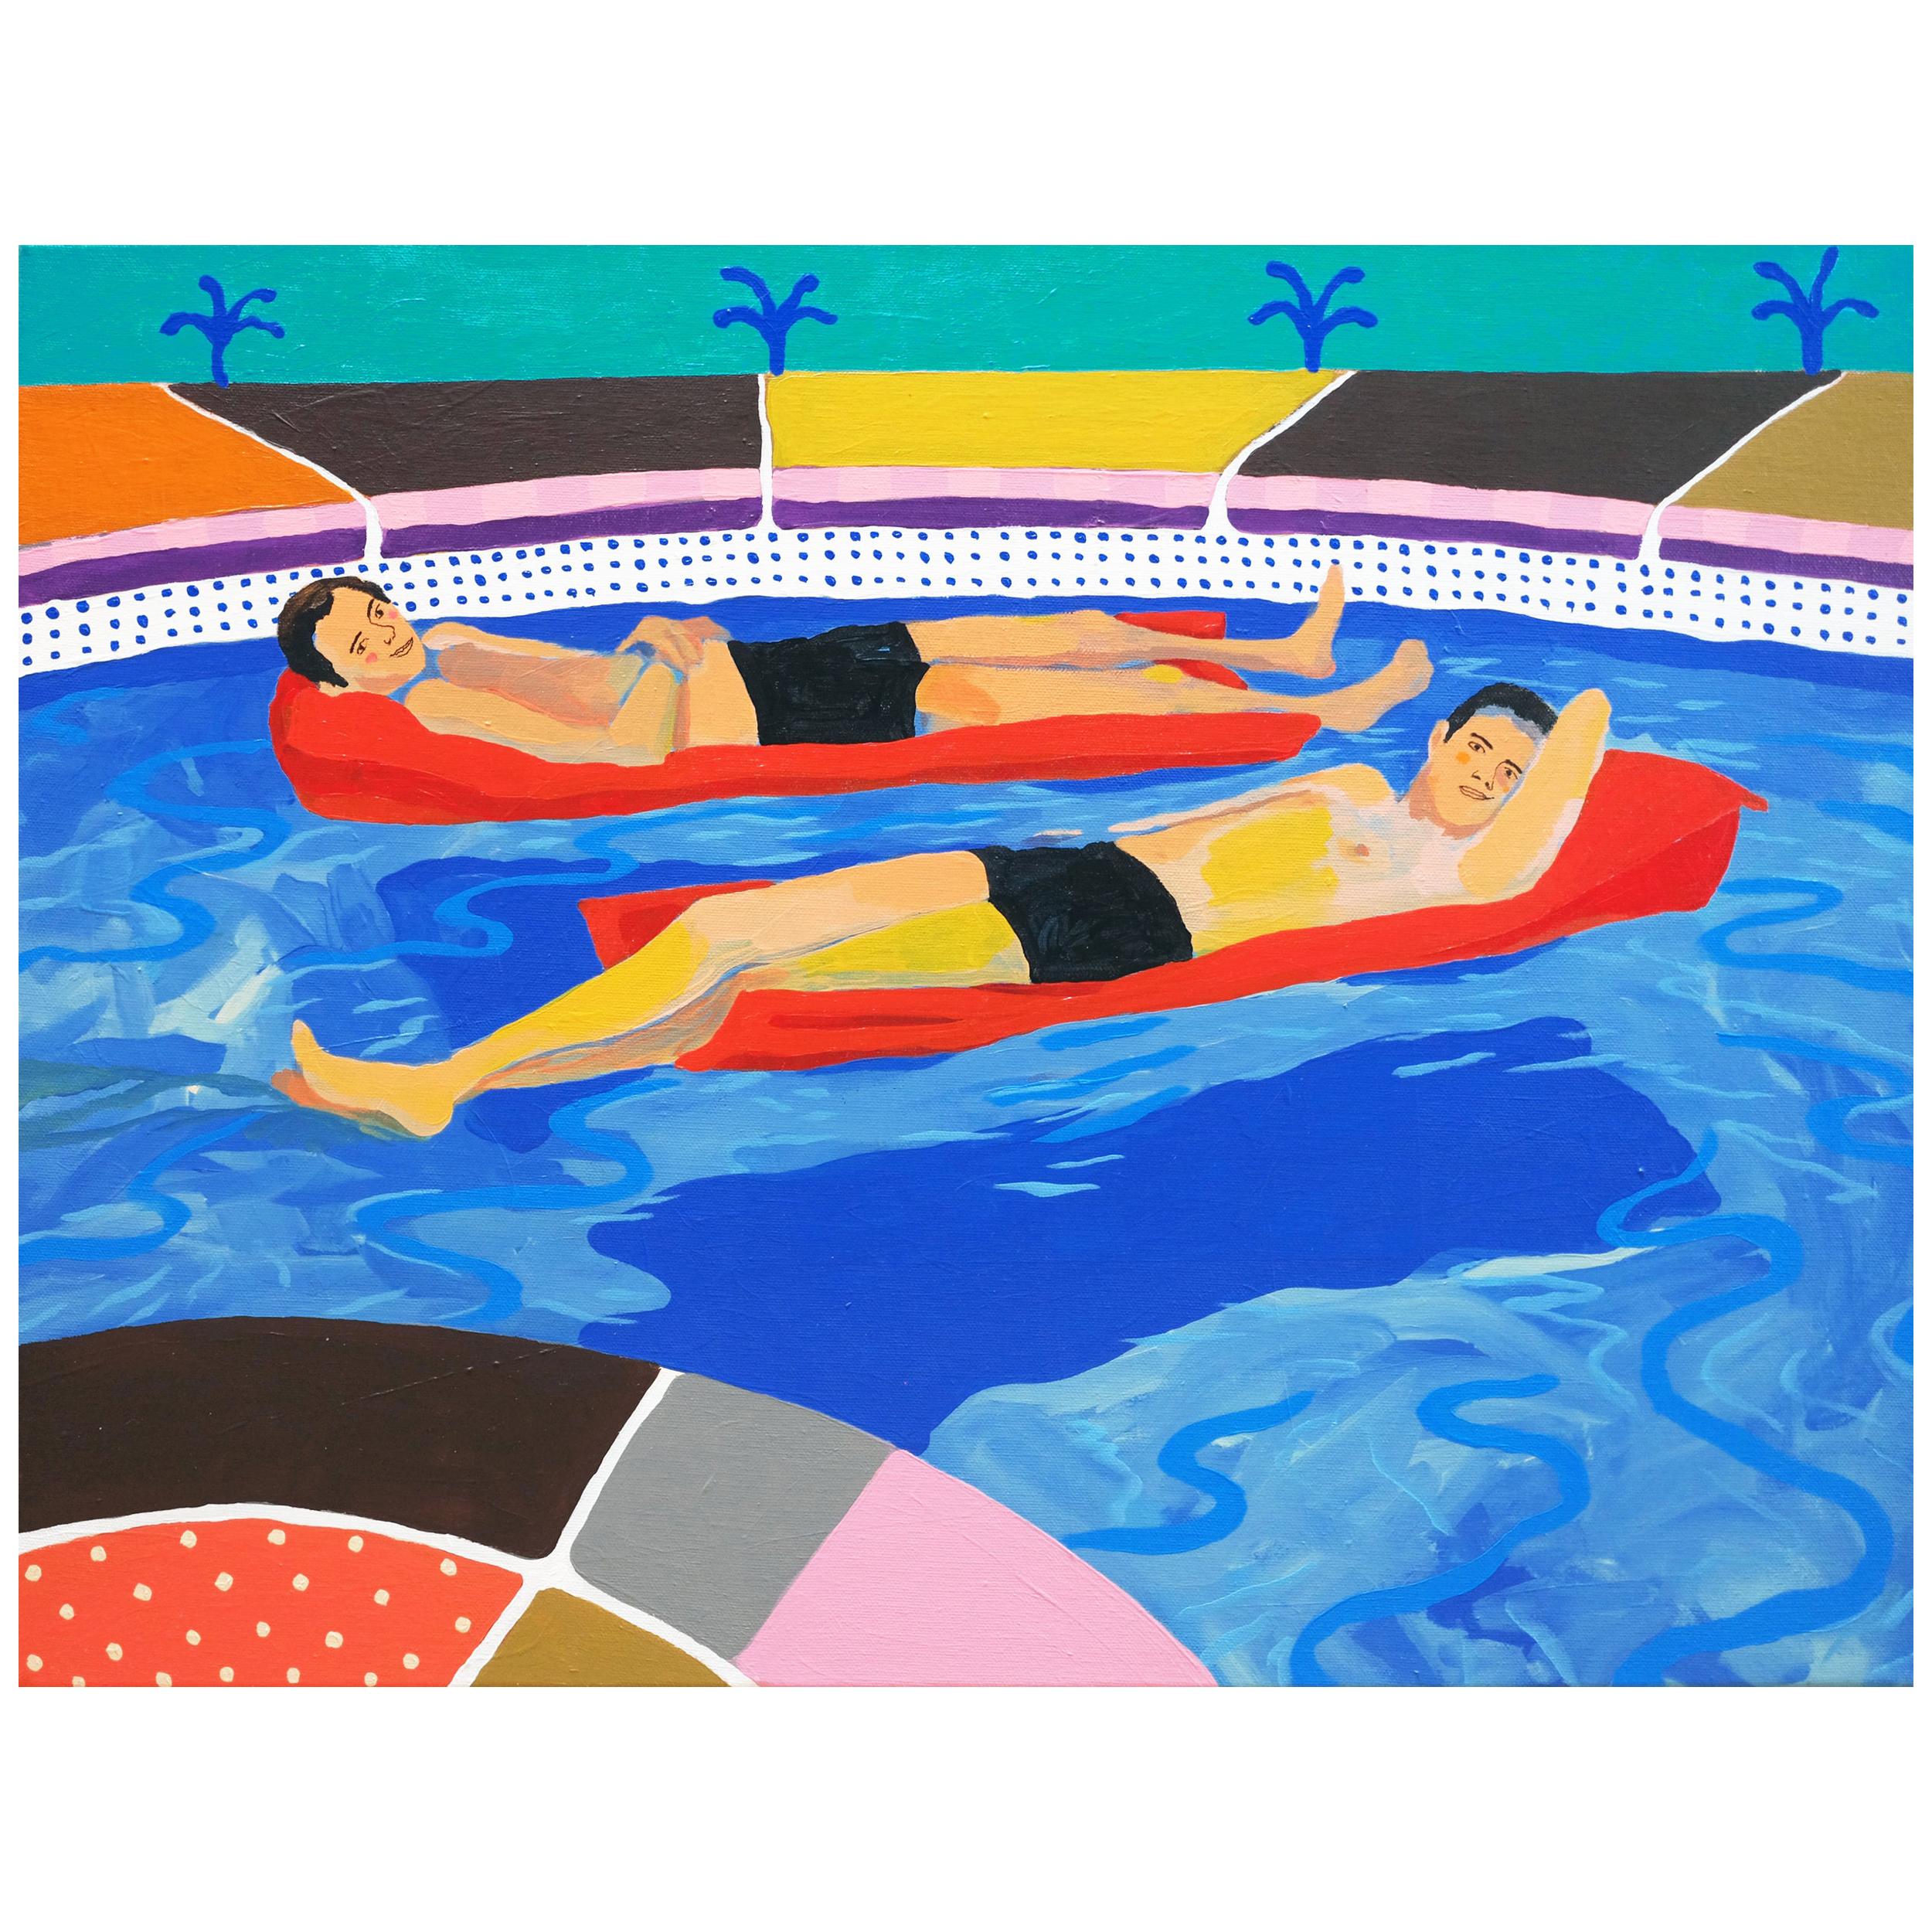 'Floating Around' Portrait Painting by Alan Fears Pop Art For Sale